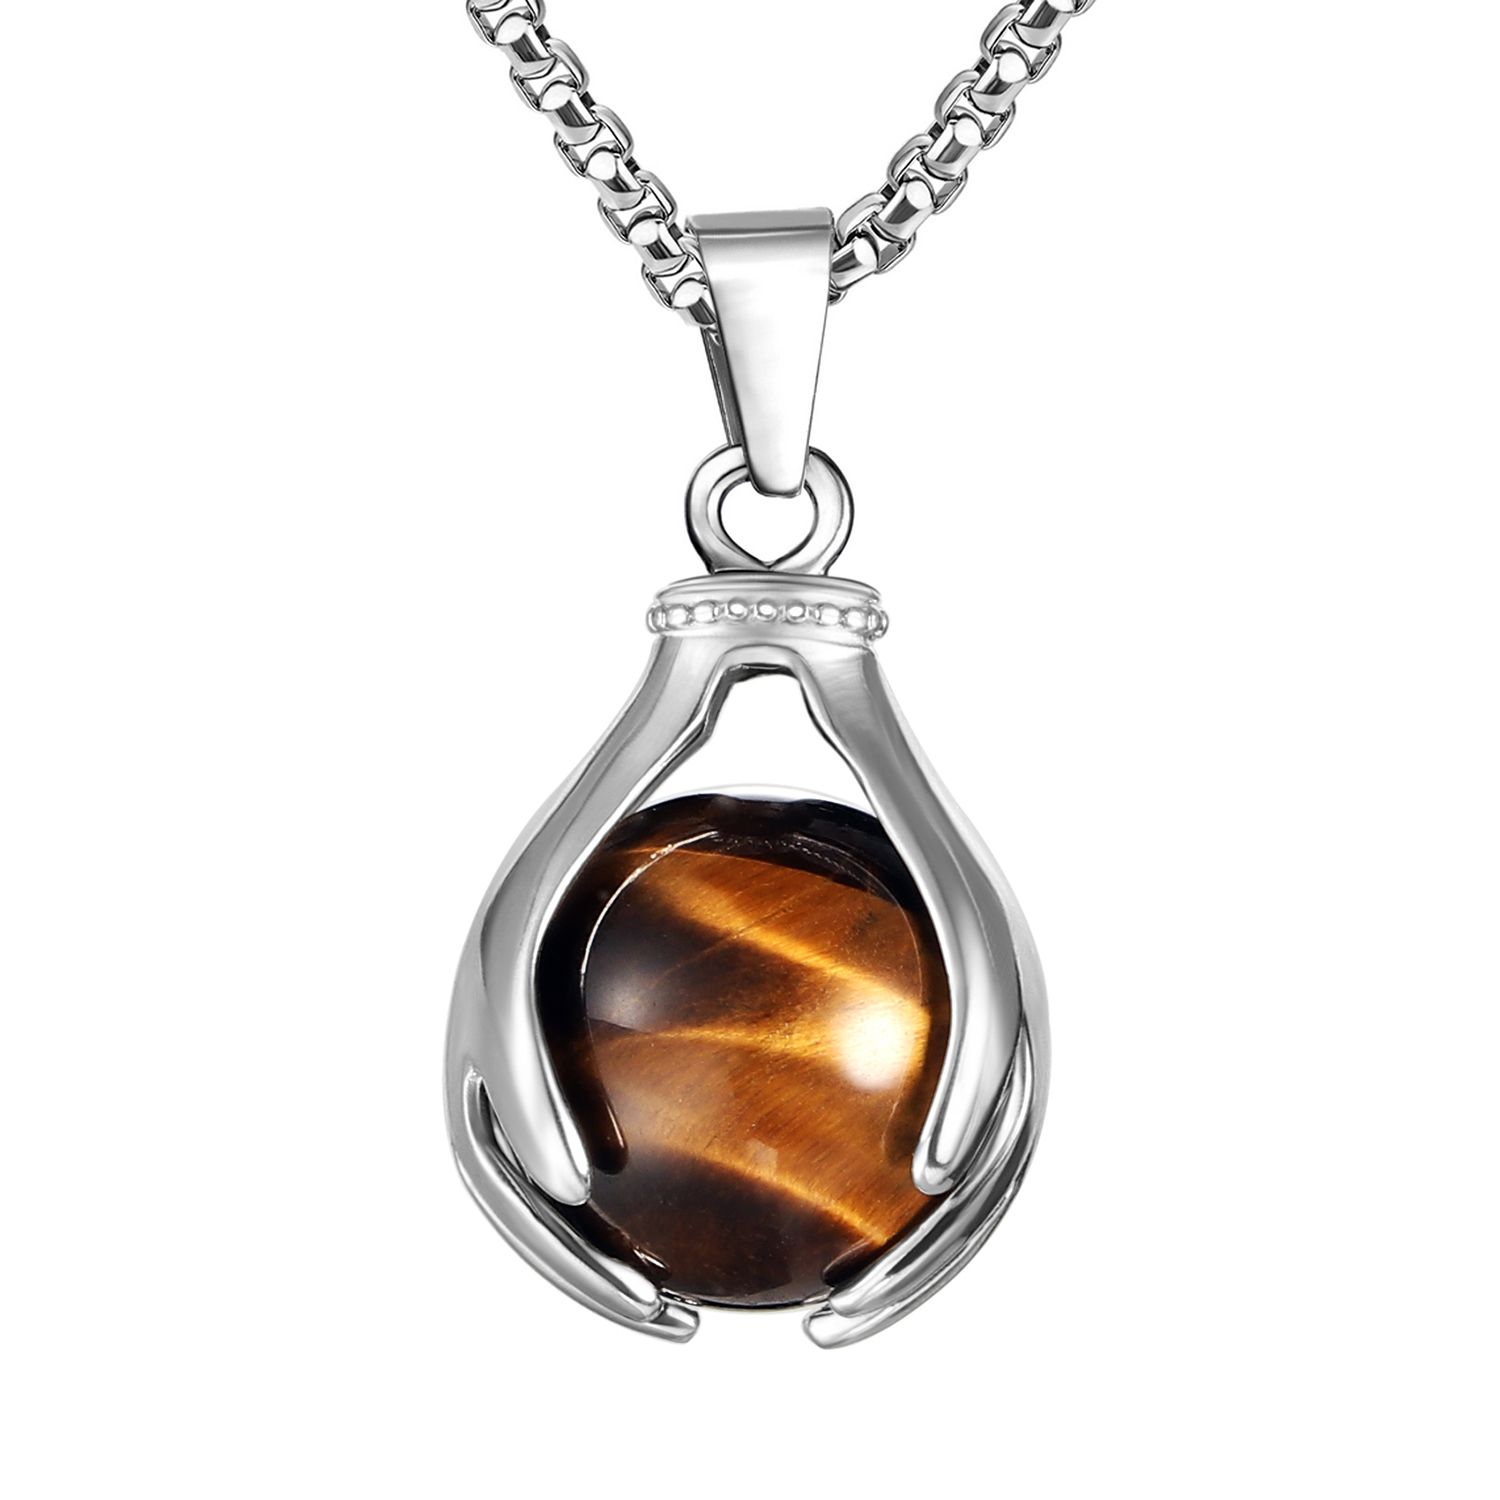 Beadnova Healing Natural Brown Tiger Eye Gemstone Necklace Crystal Ball Pendant Necklace With